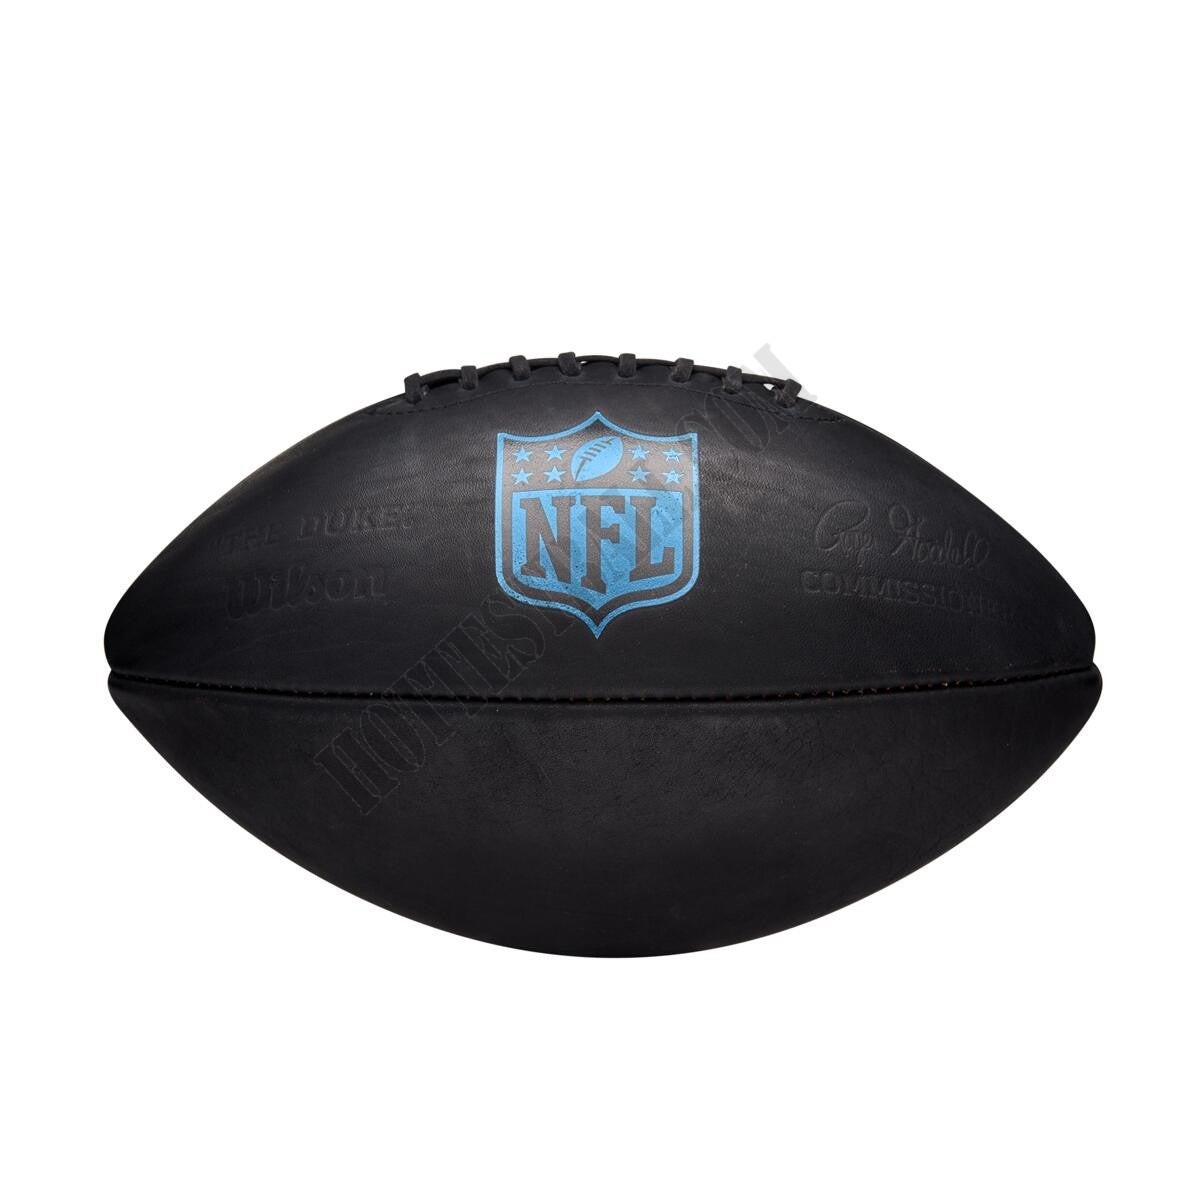 The Duke NFL Football Limited Black Edition - Wilson Discount Store - -5